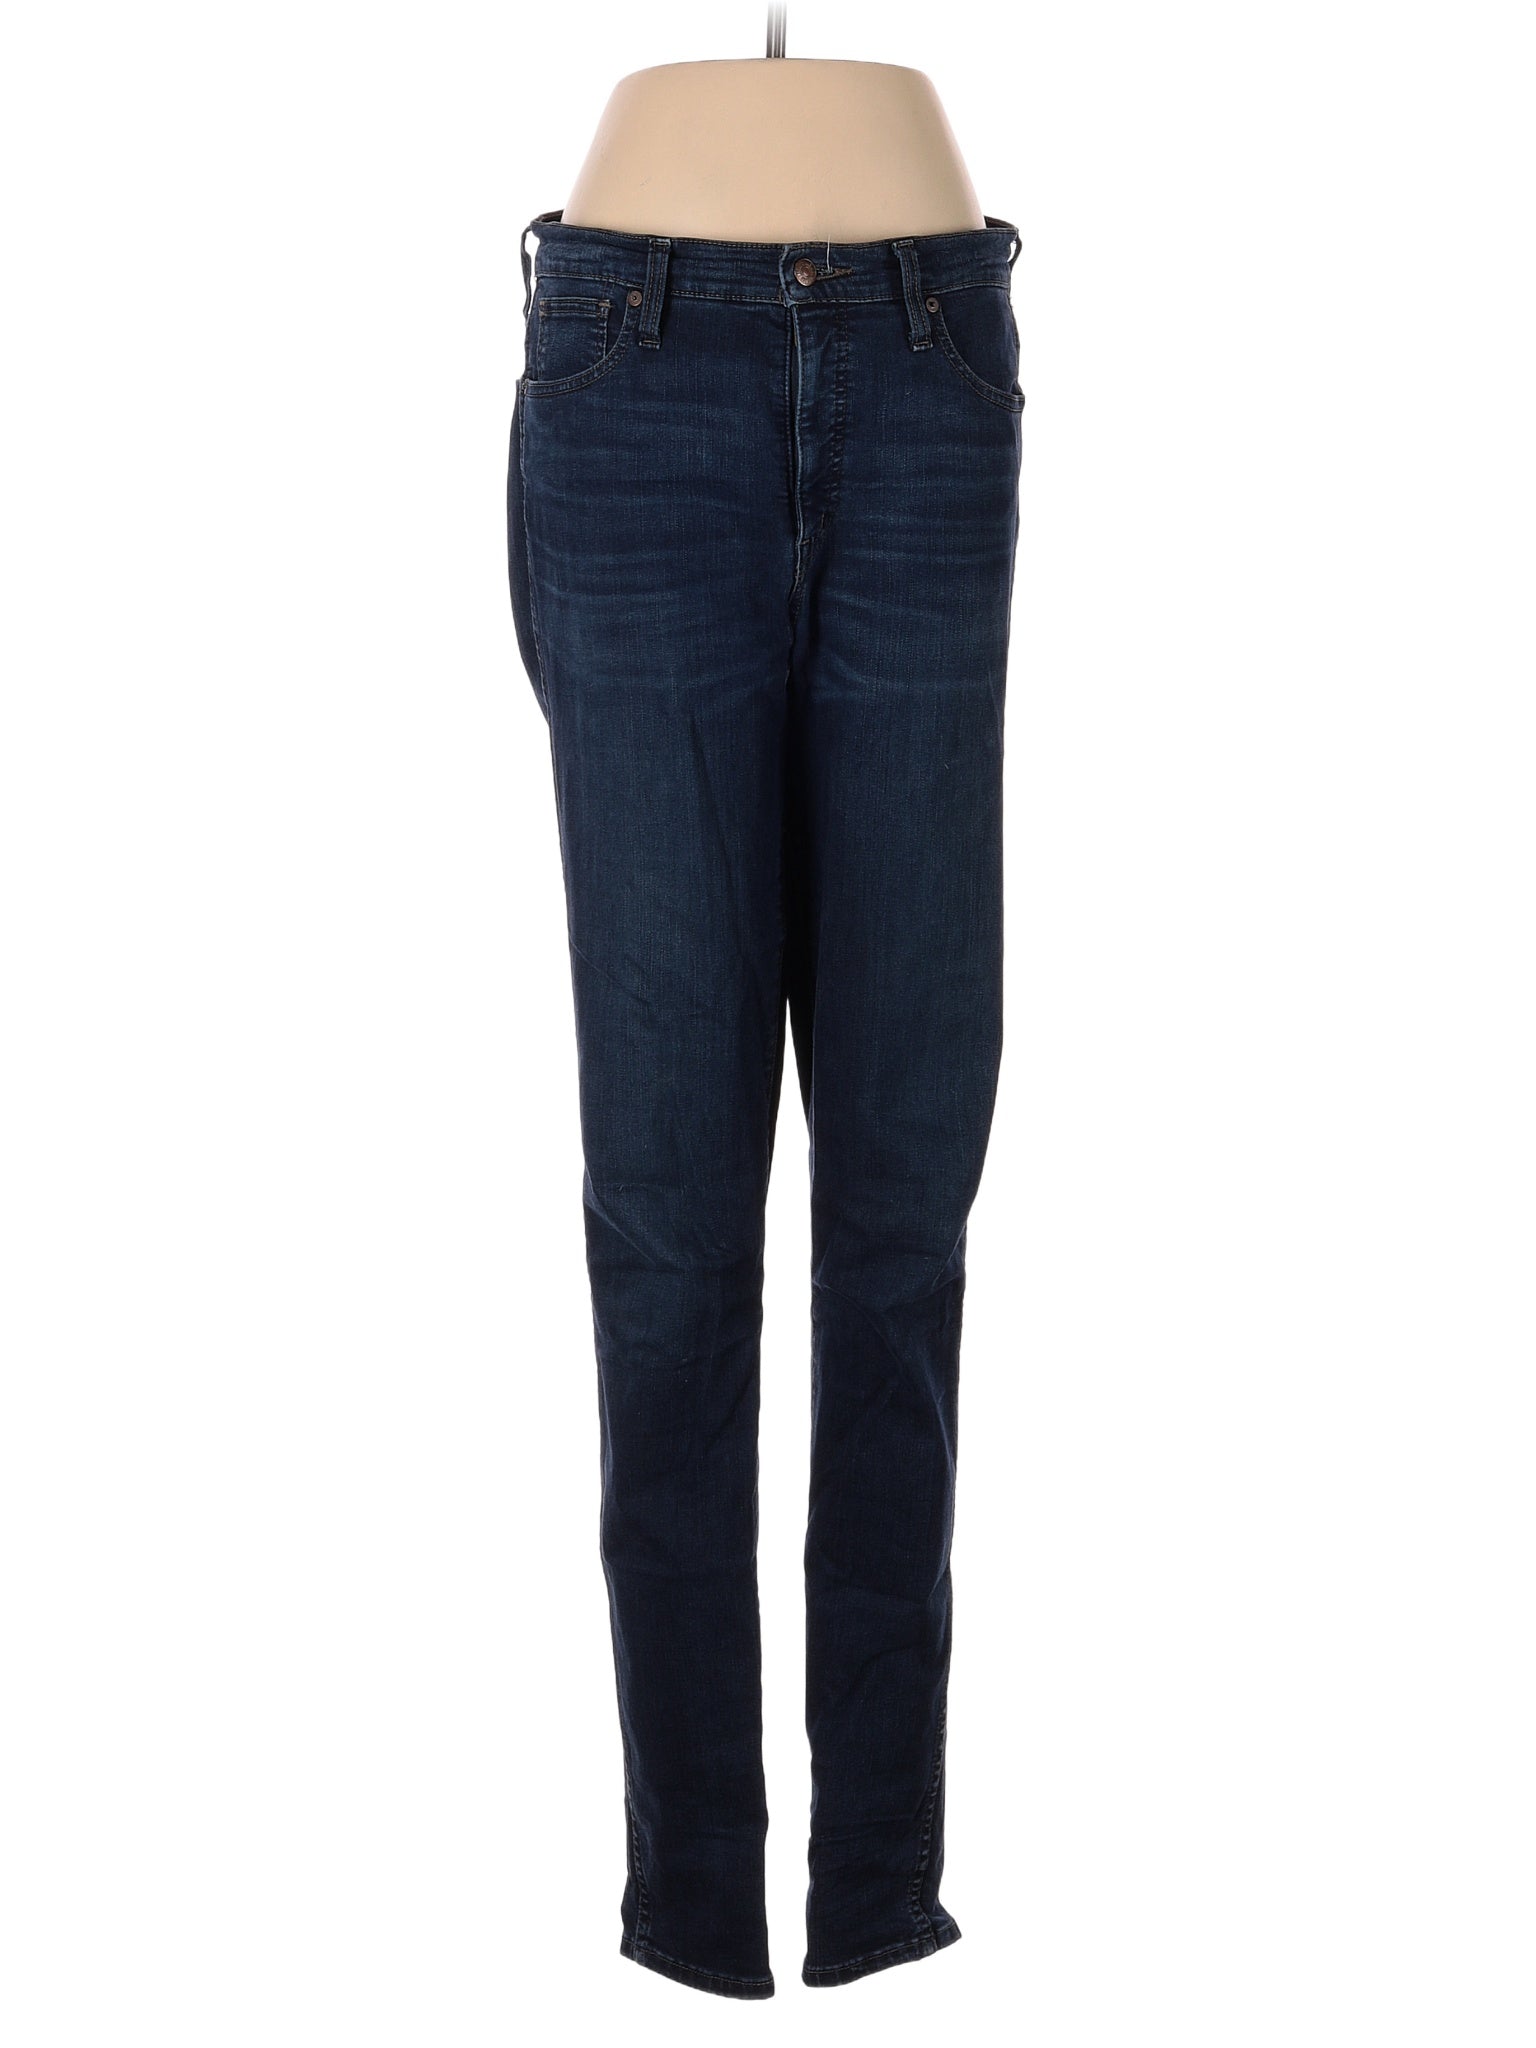 High-Rise Skinny Madewell Jeans 29 Tall in Dark Wash waist size - 29 T